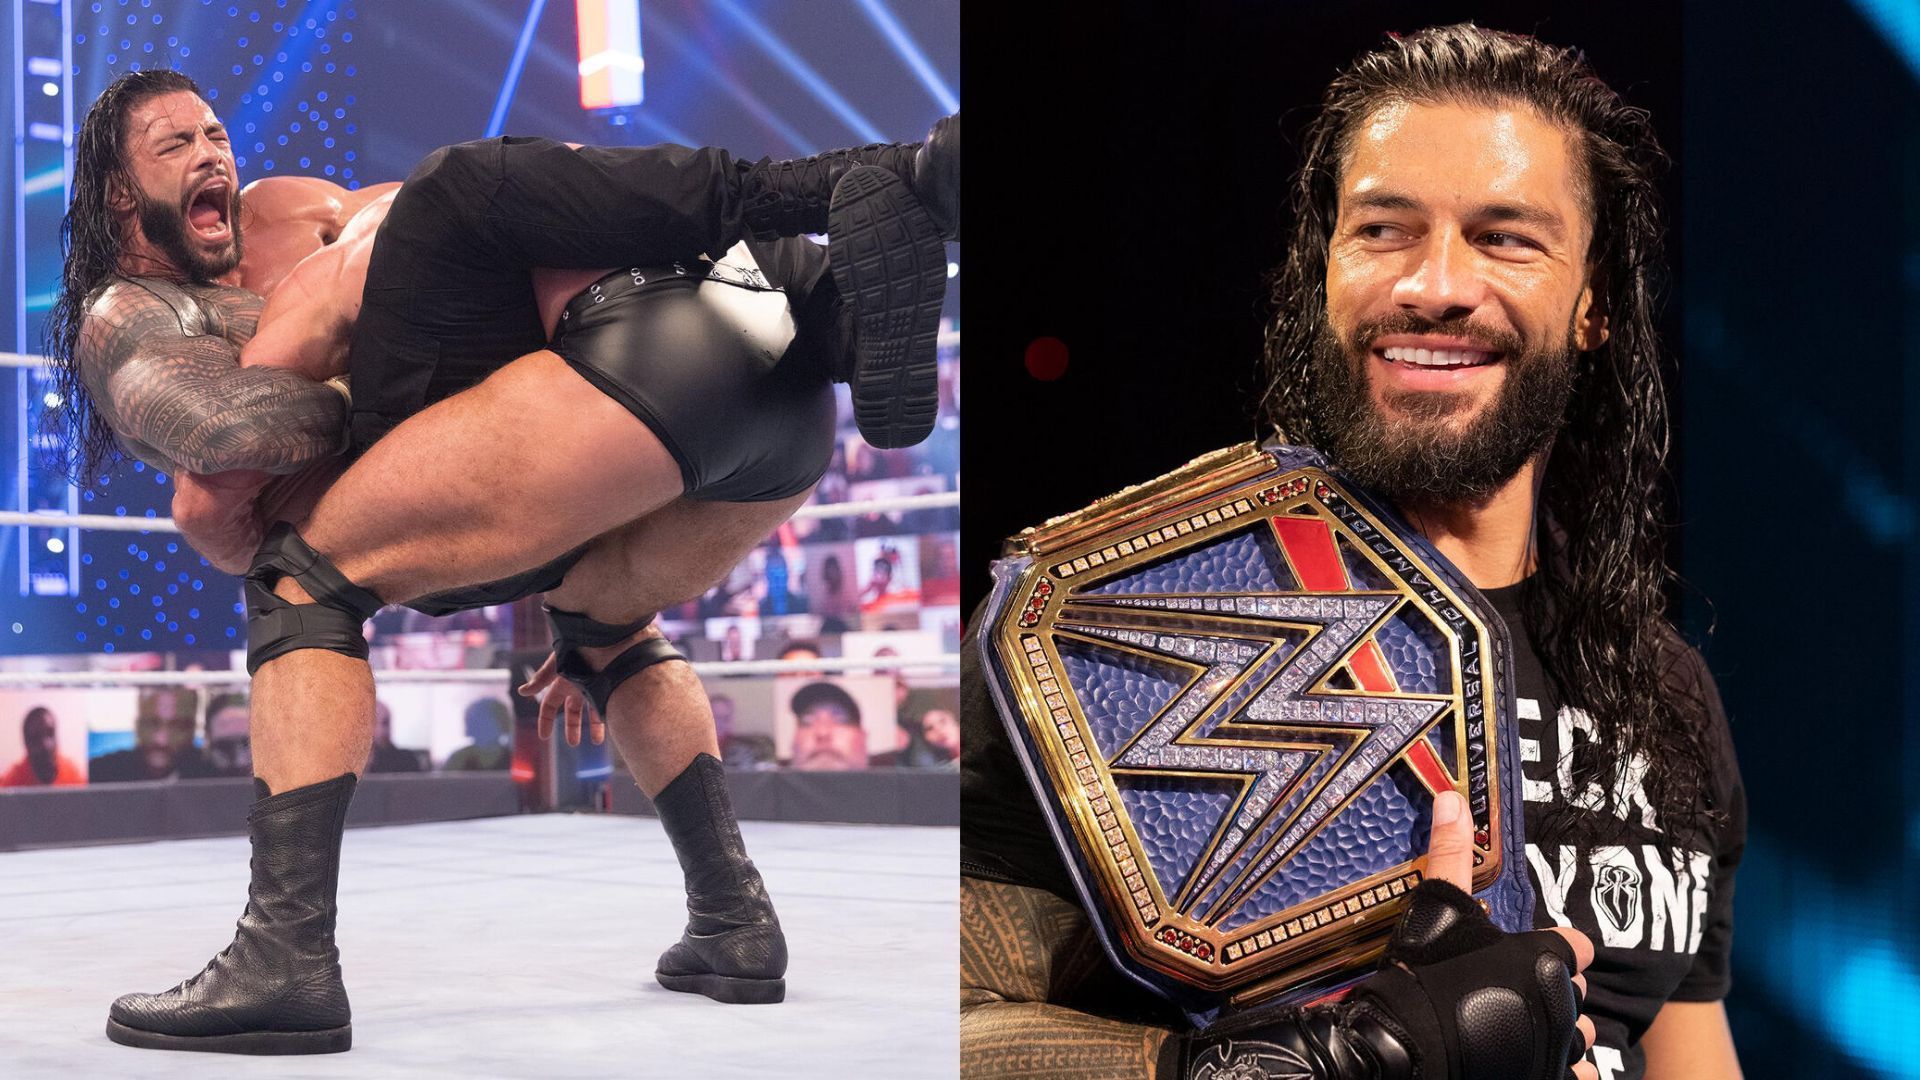 Roman Reigns has found a lot of success since then